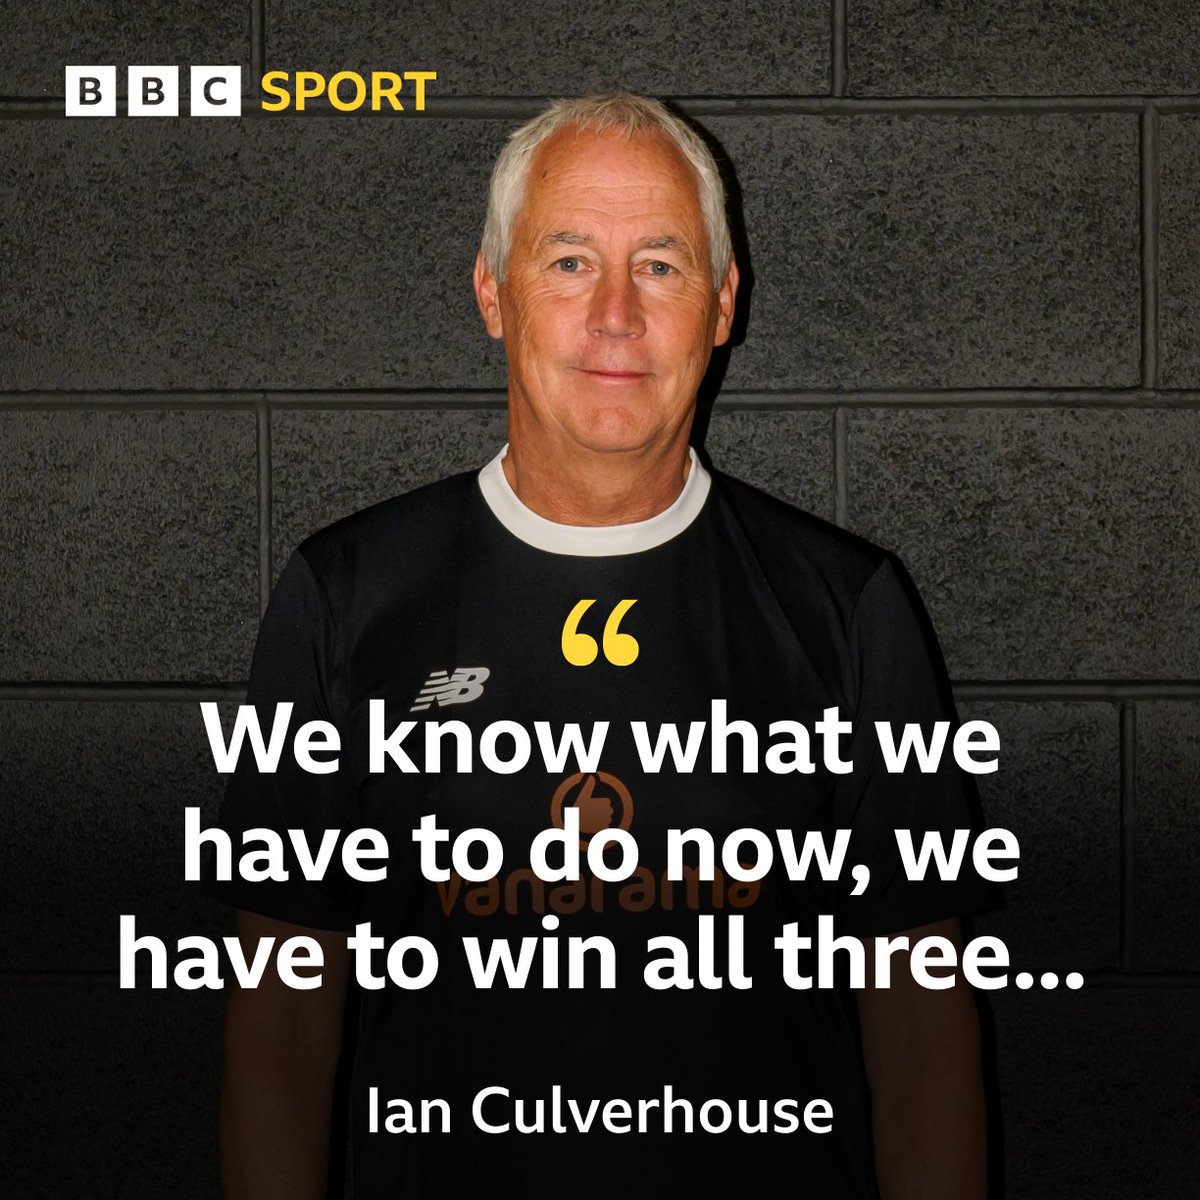 After a 2-1 defeat to Brackley in the National League North, @bostonunited manager Ian Culverhouse says the Pilgrims know the challenge ahead... Hear from him and Jacob Hazel⬇️ bbc.in/BostonUnited